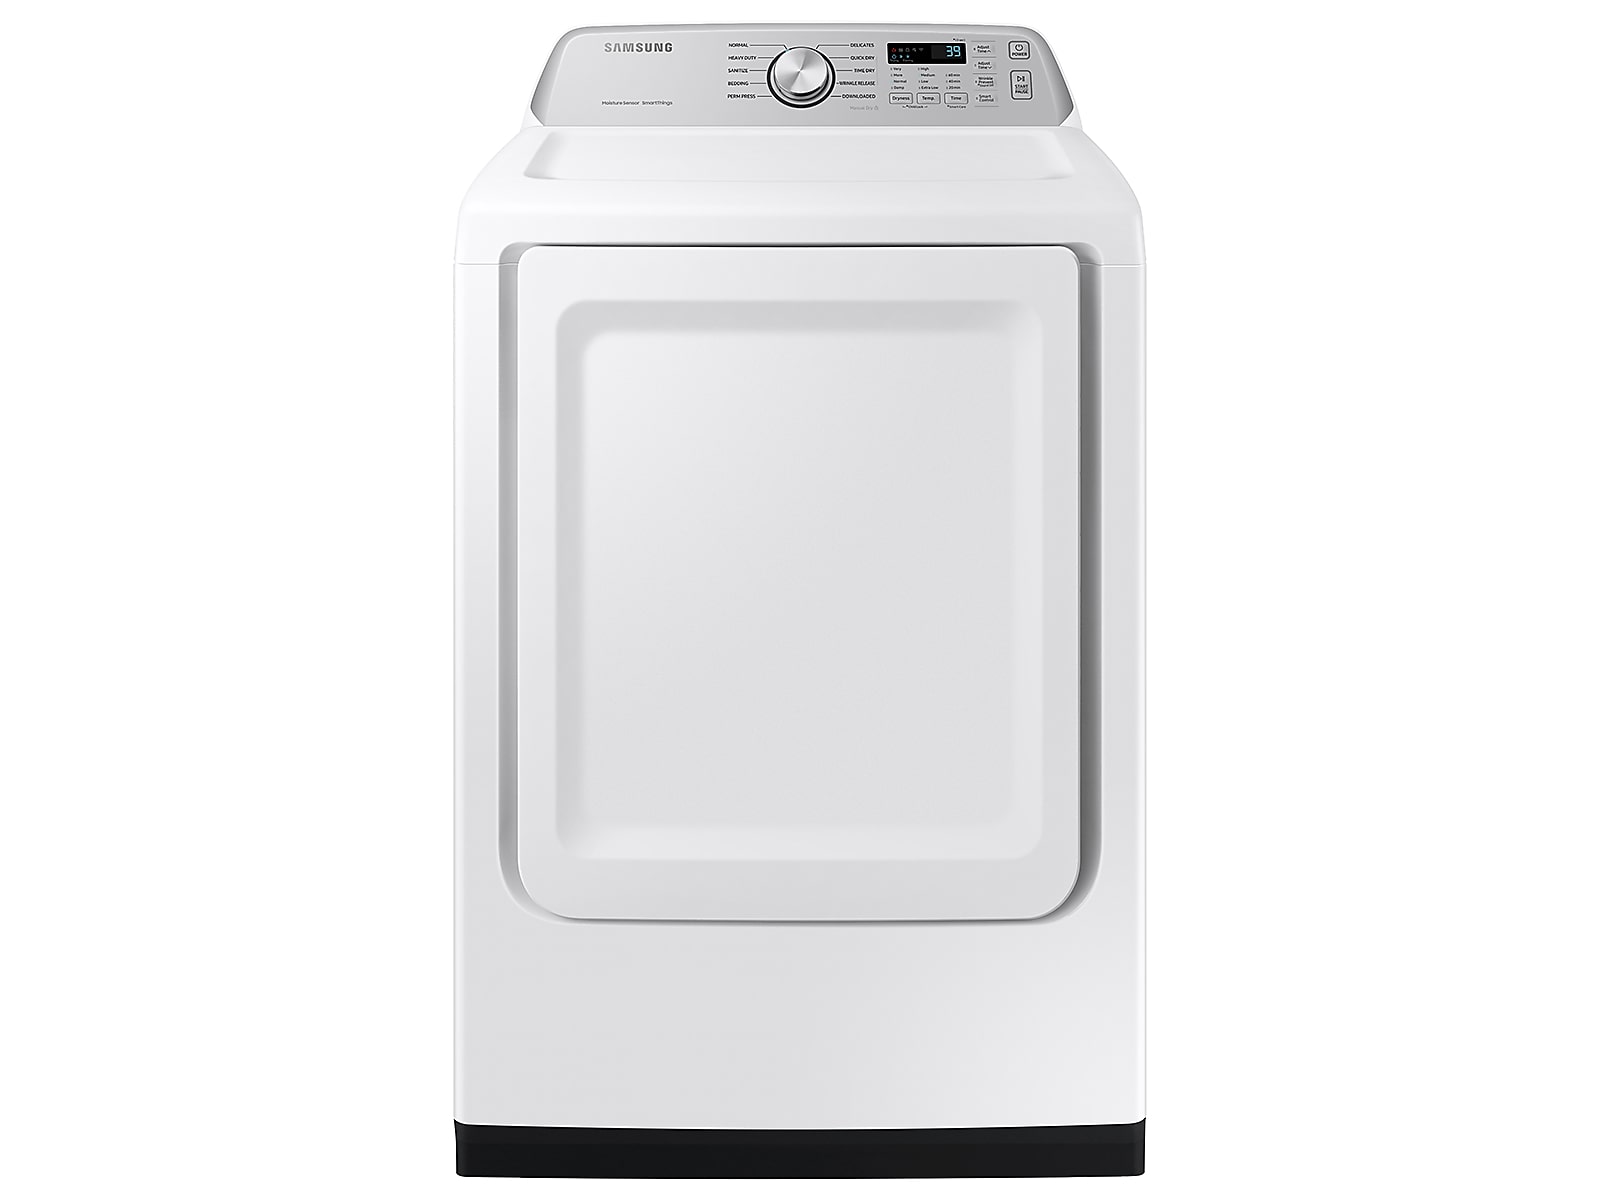 Samsung 7.4 cu. ft. Smart Electric Dryer with Sensor Dry in White(DVE47CG3500WA3)